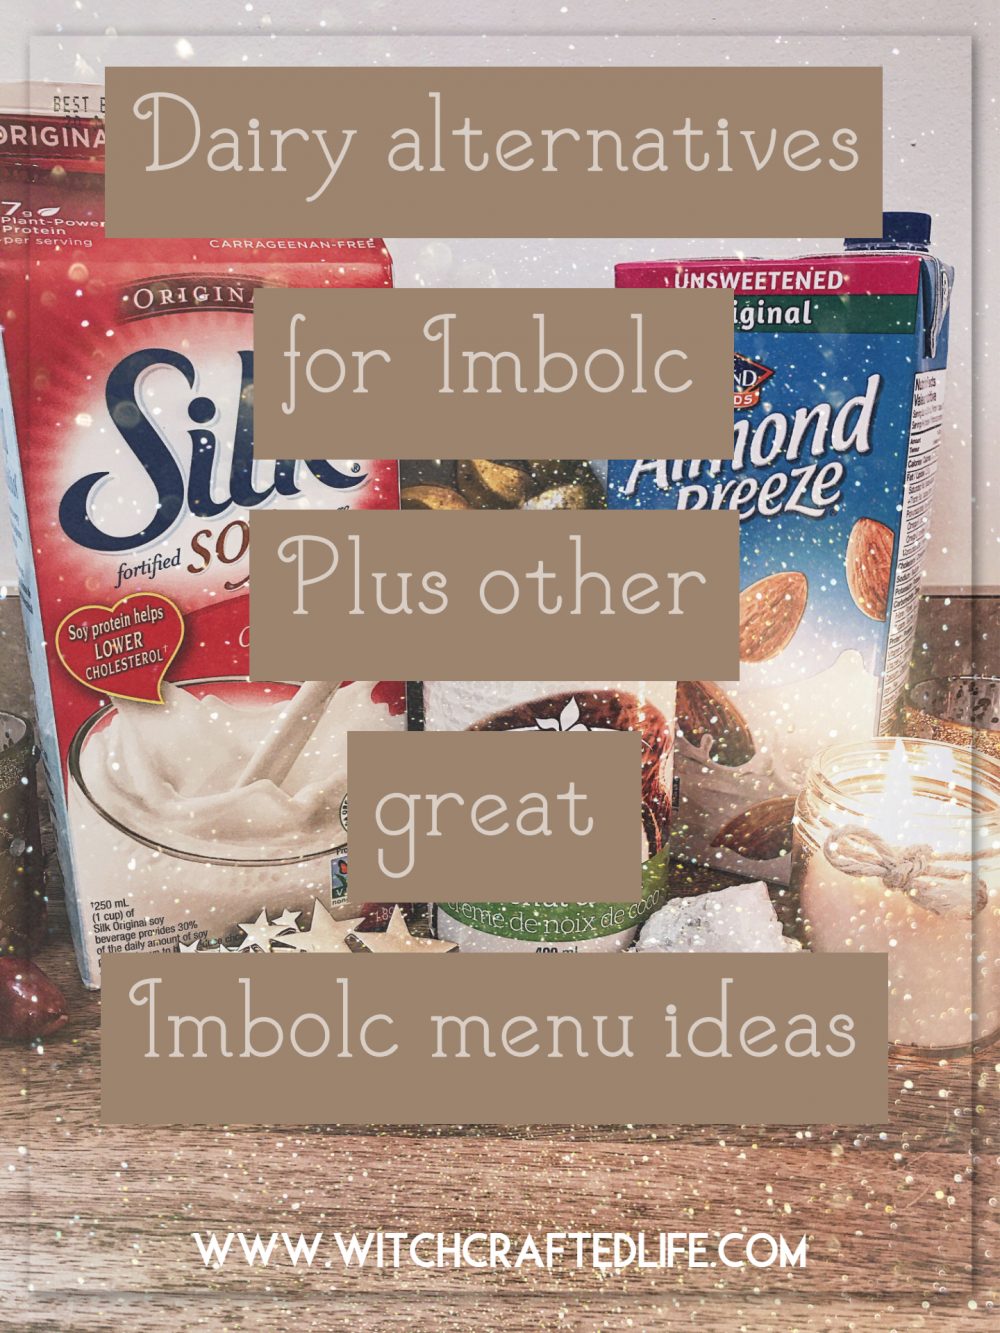 Dairy alternatives for Imbolc